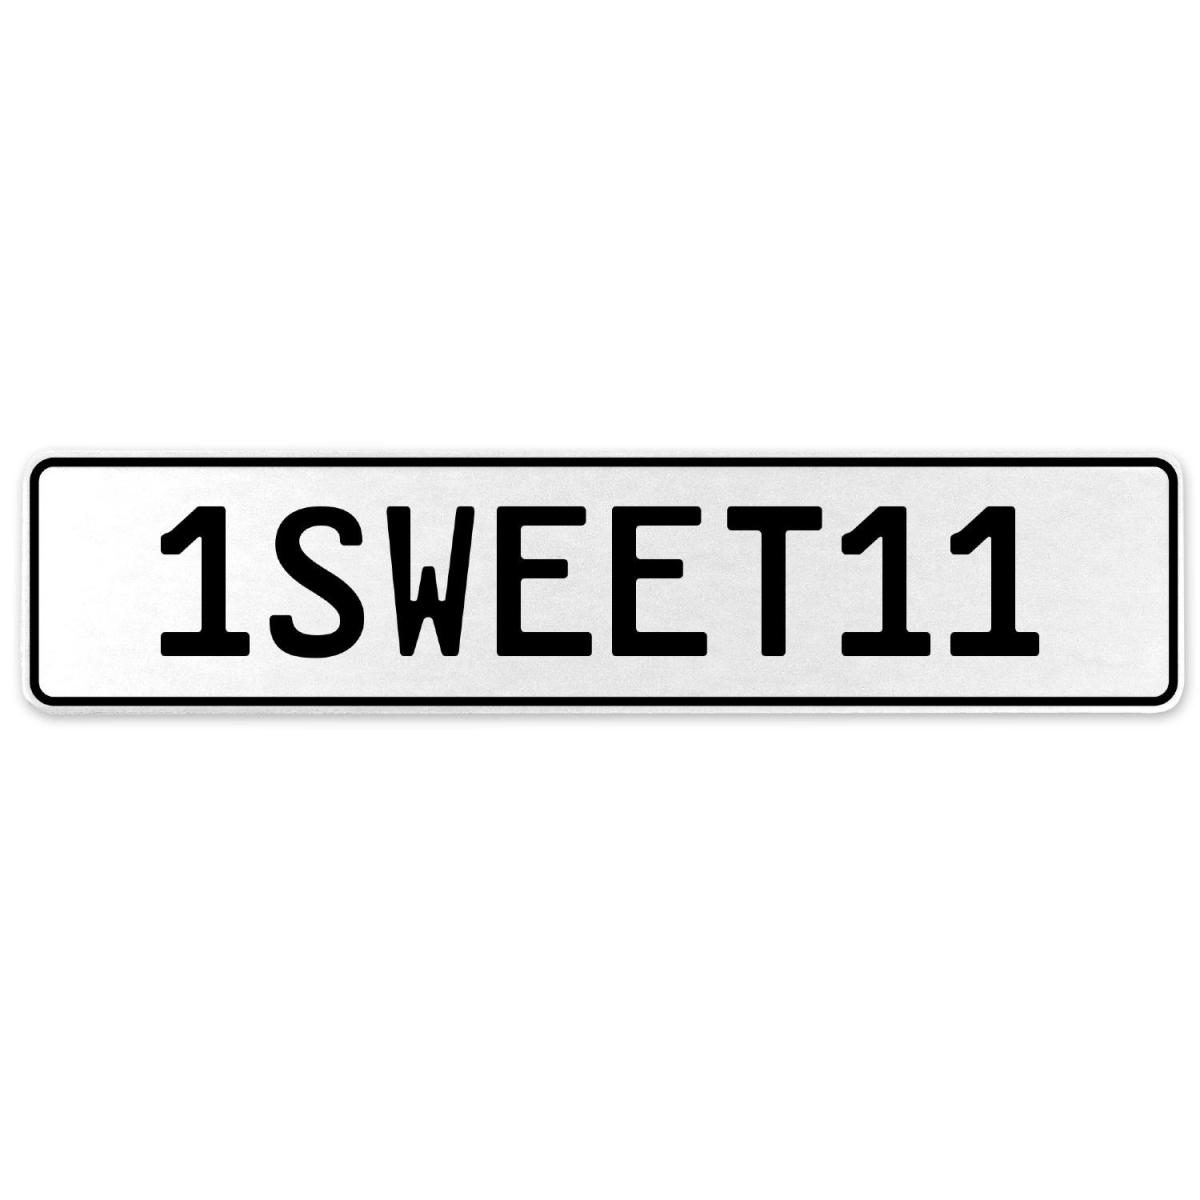 554212 1sweet11 - White Aluminum Street Sign Mancave Euro Plate Name Door Sign Wall